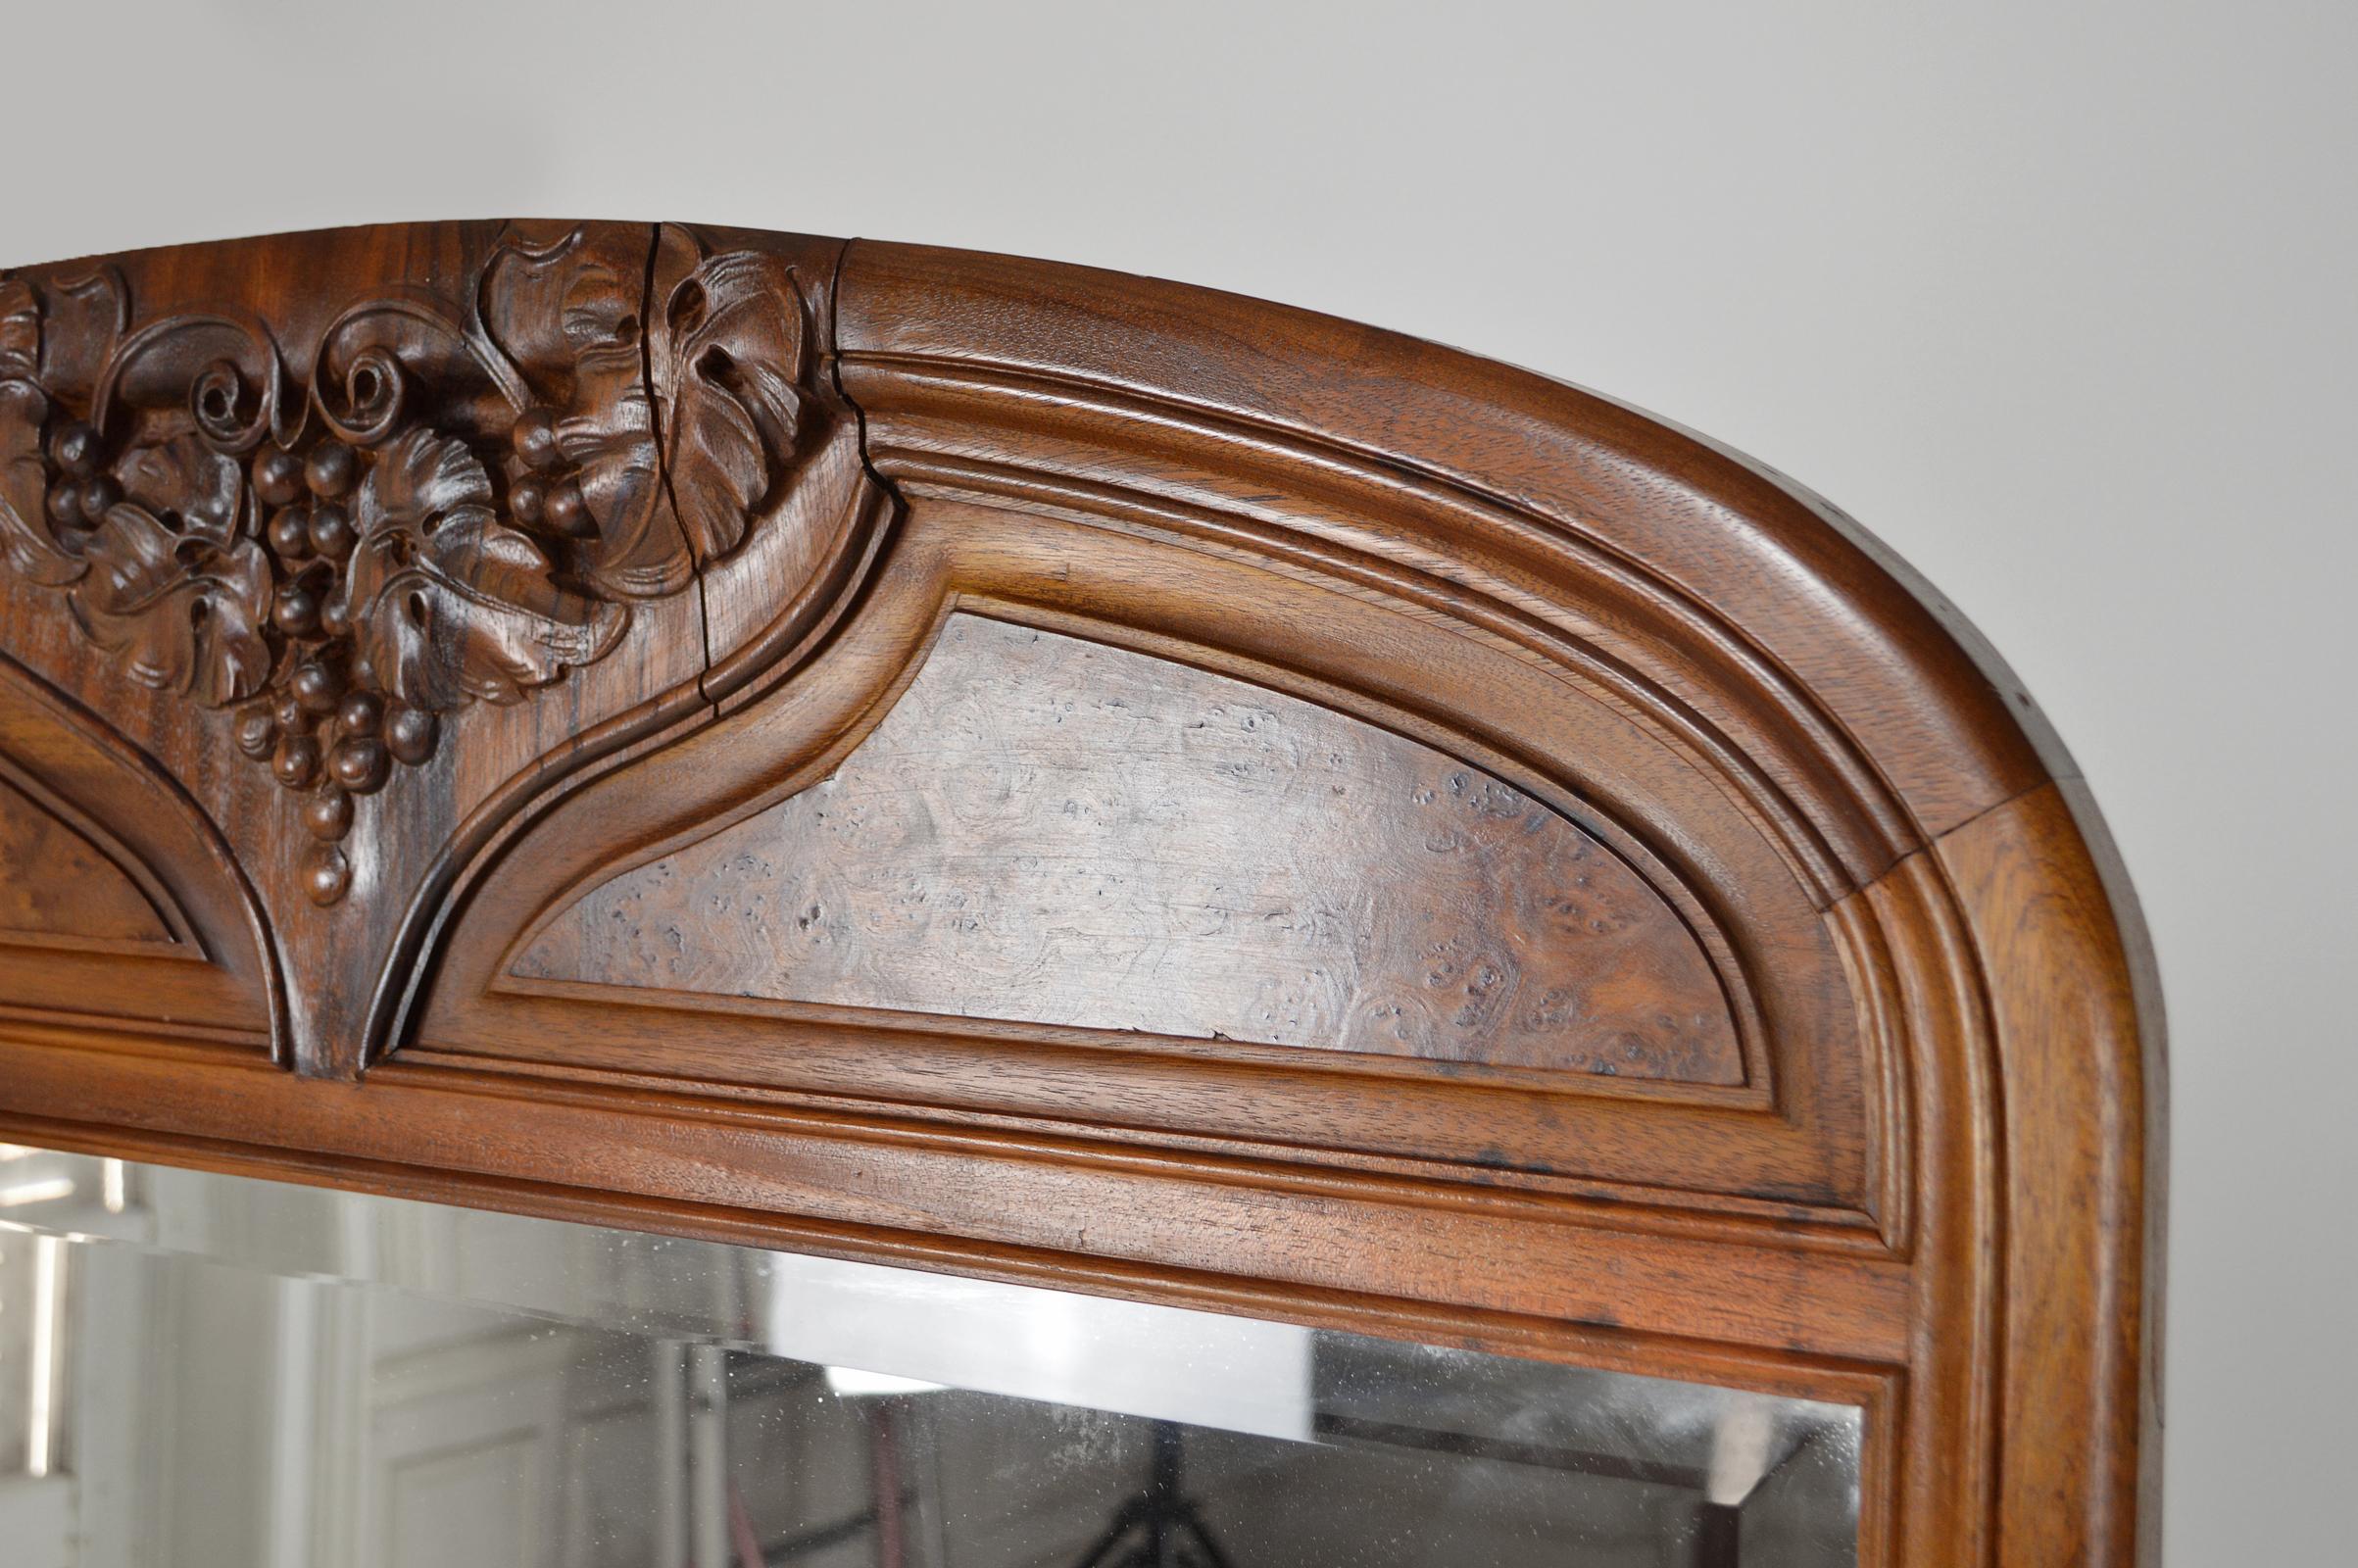 French Art Nouveau Fireplace Mantel Mirror, Carved Walnut and Burl, circa 1905 For Sale 2